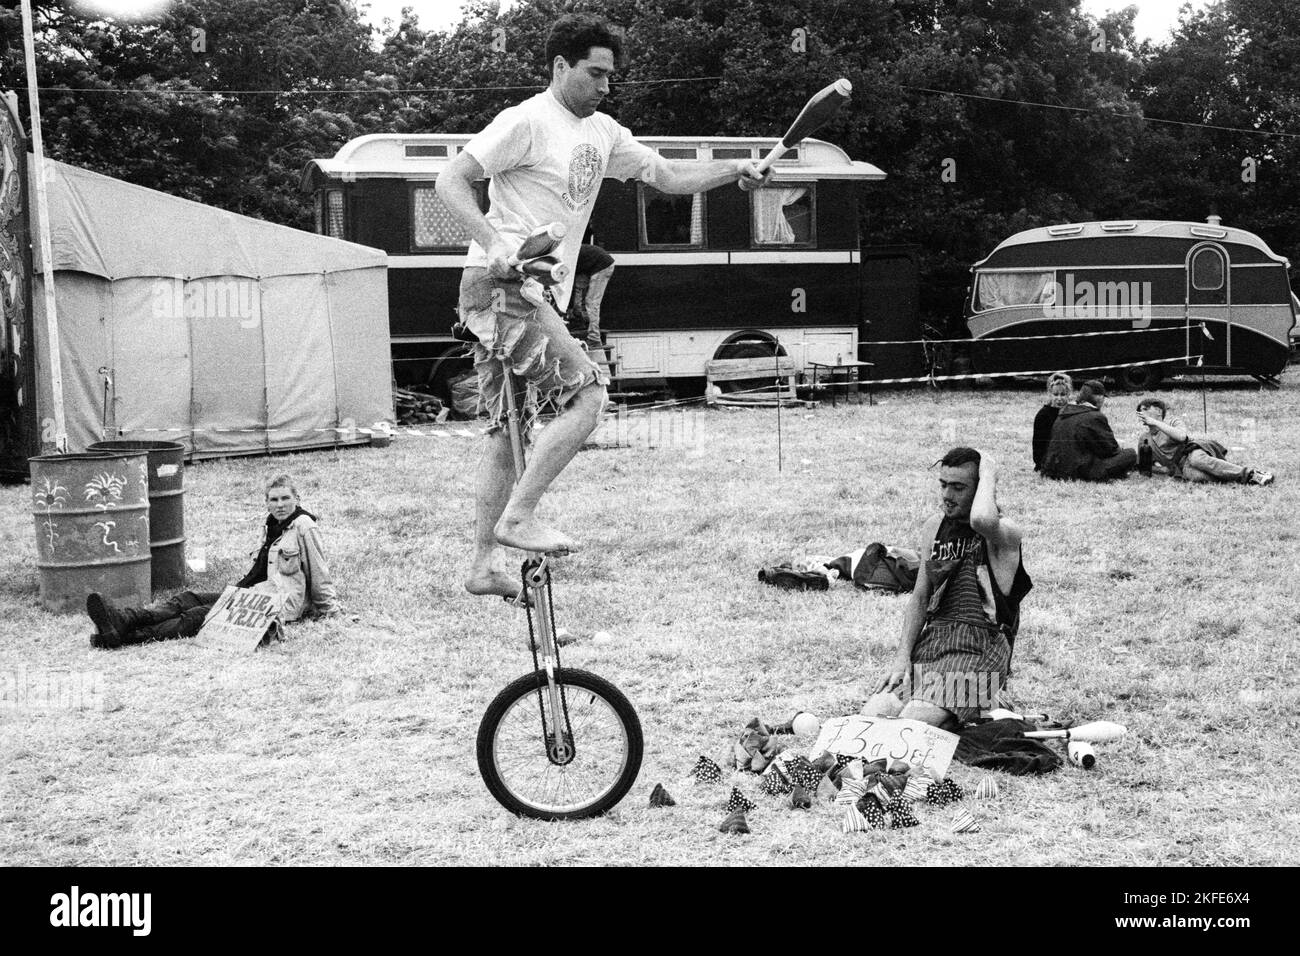 Performers practice in the Circus Field at the Glastonbury Festival, Pilton Farm, Somerset, England, June 1995. In 1995 the festival celebrated its 25th anniversary. Photo: ROB WATKINS Stock Photo